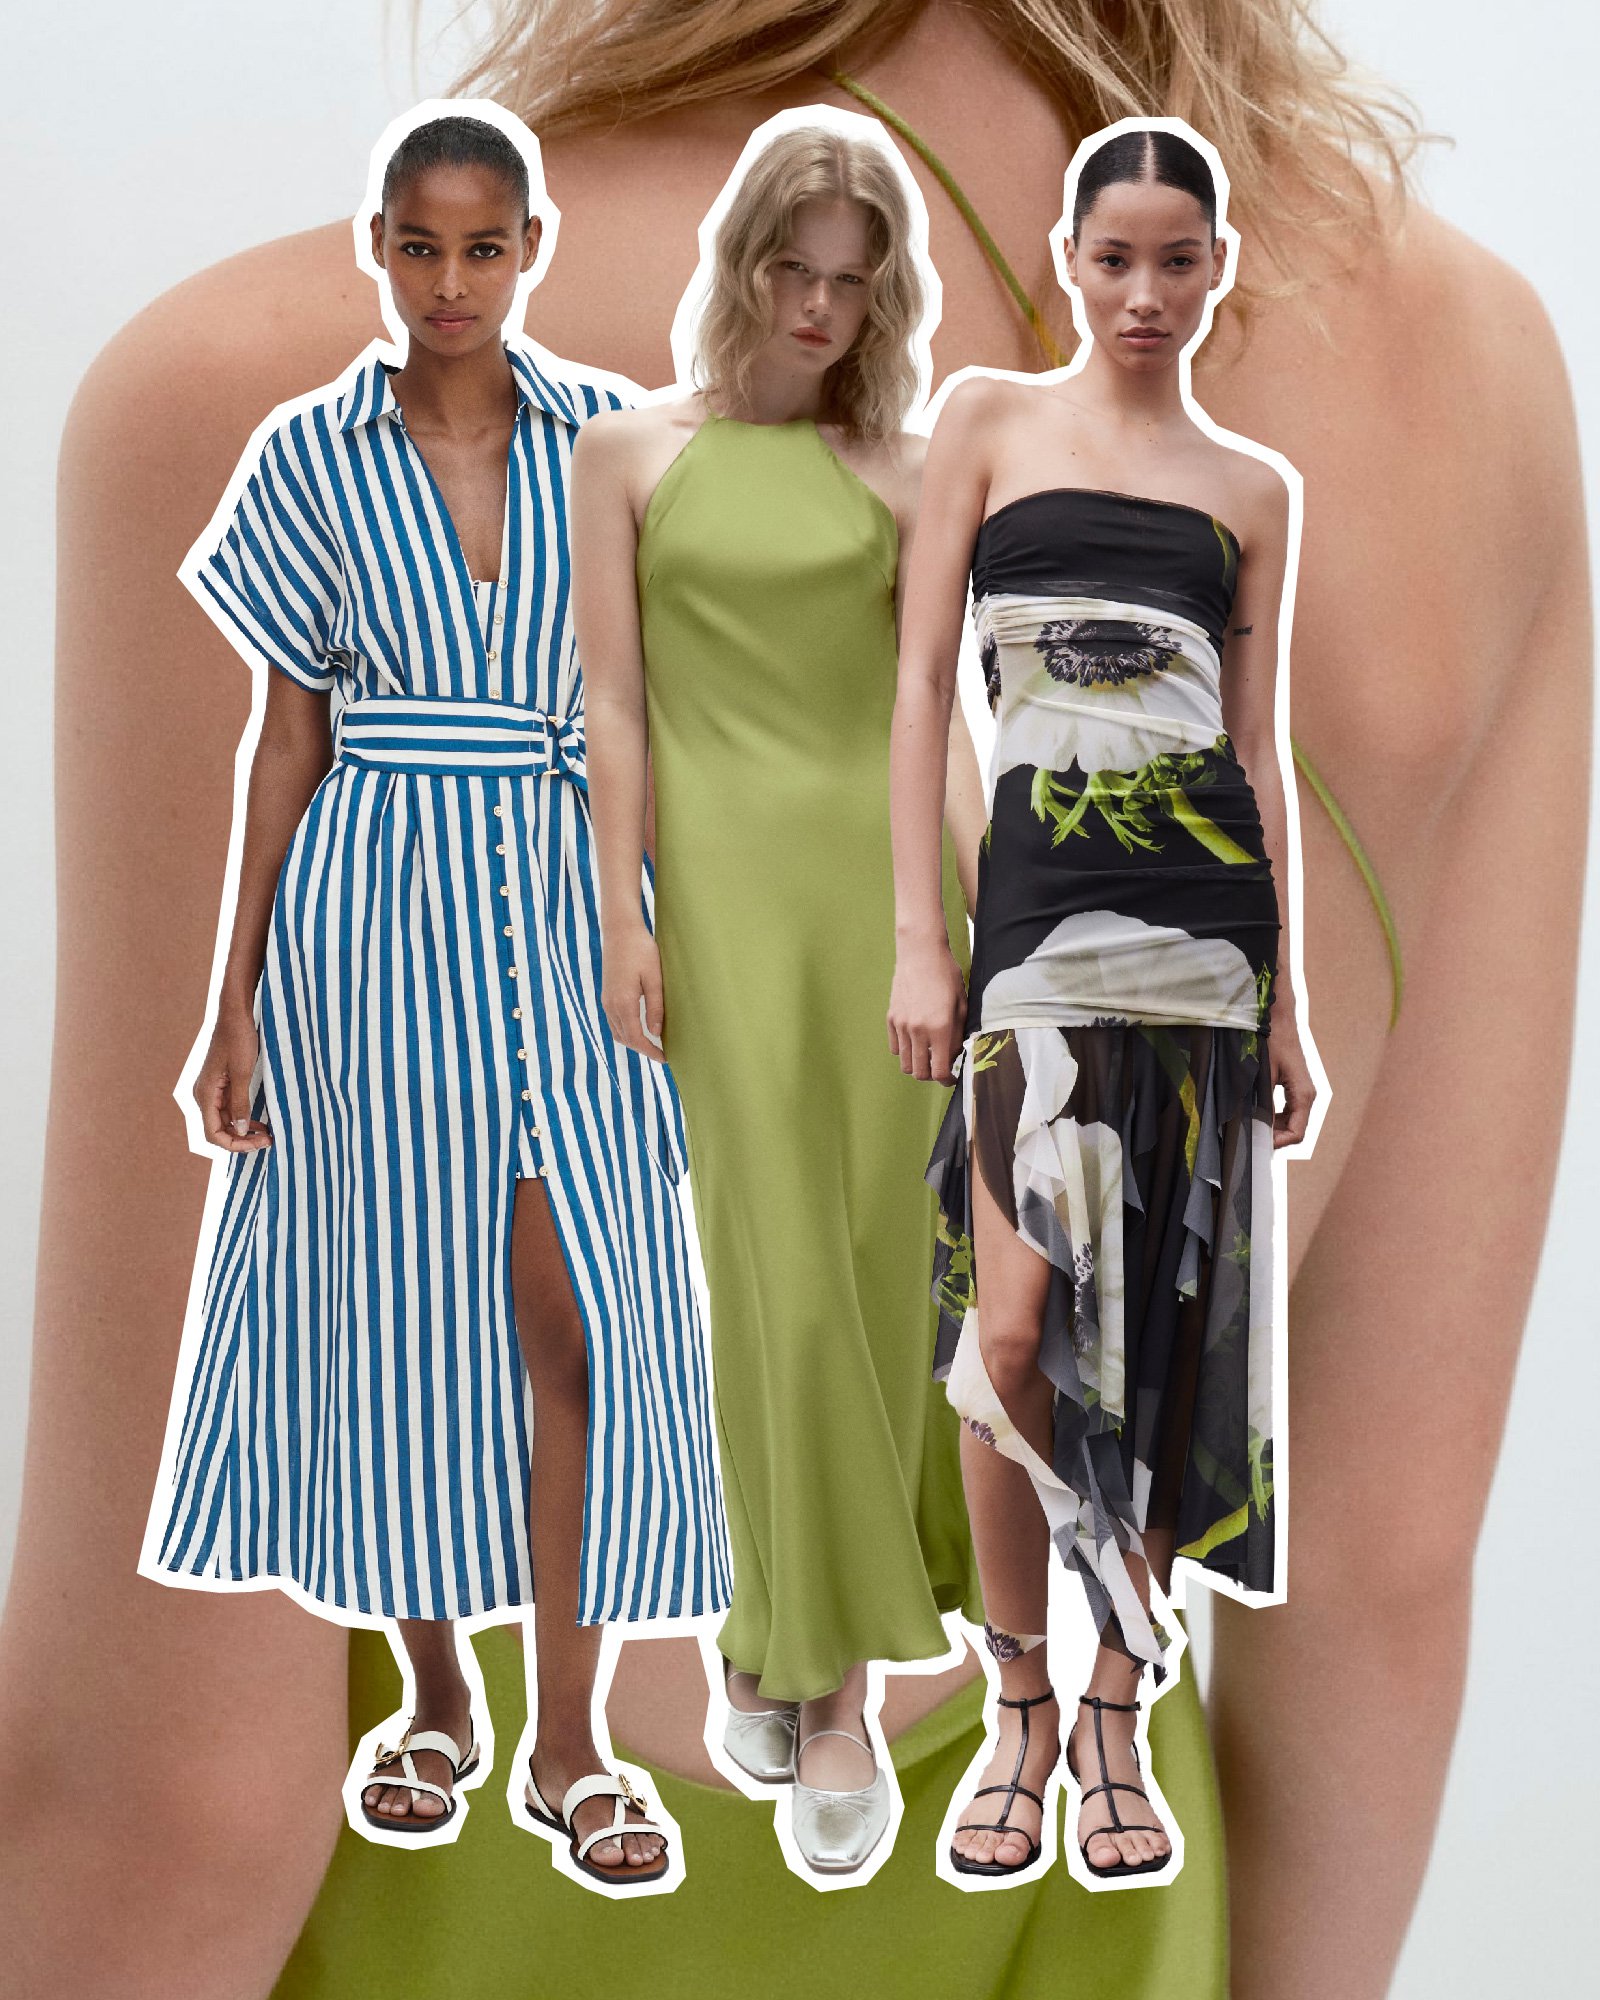 ZARA WOMEN'S DRESSES NEW COLLECTION / MAY 2023 